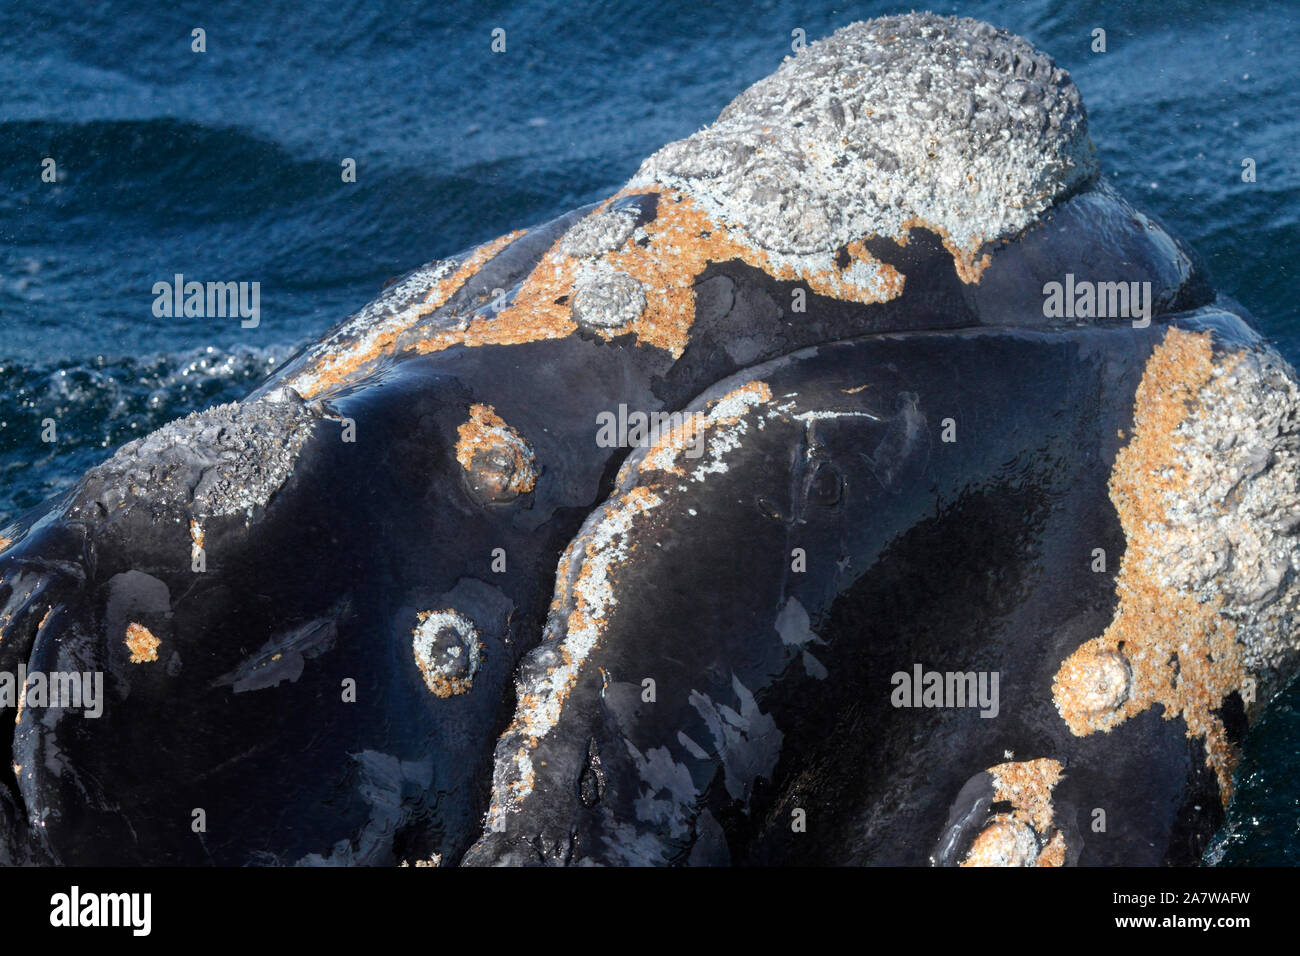 Southern Right Whale at Peninsula Valdes, Atlantic Ocean. Stock Photo